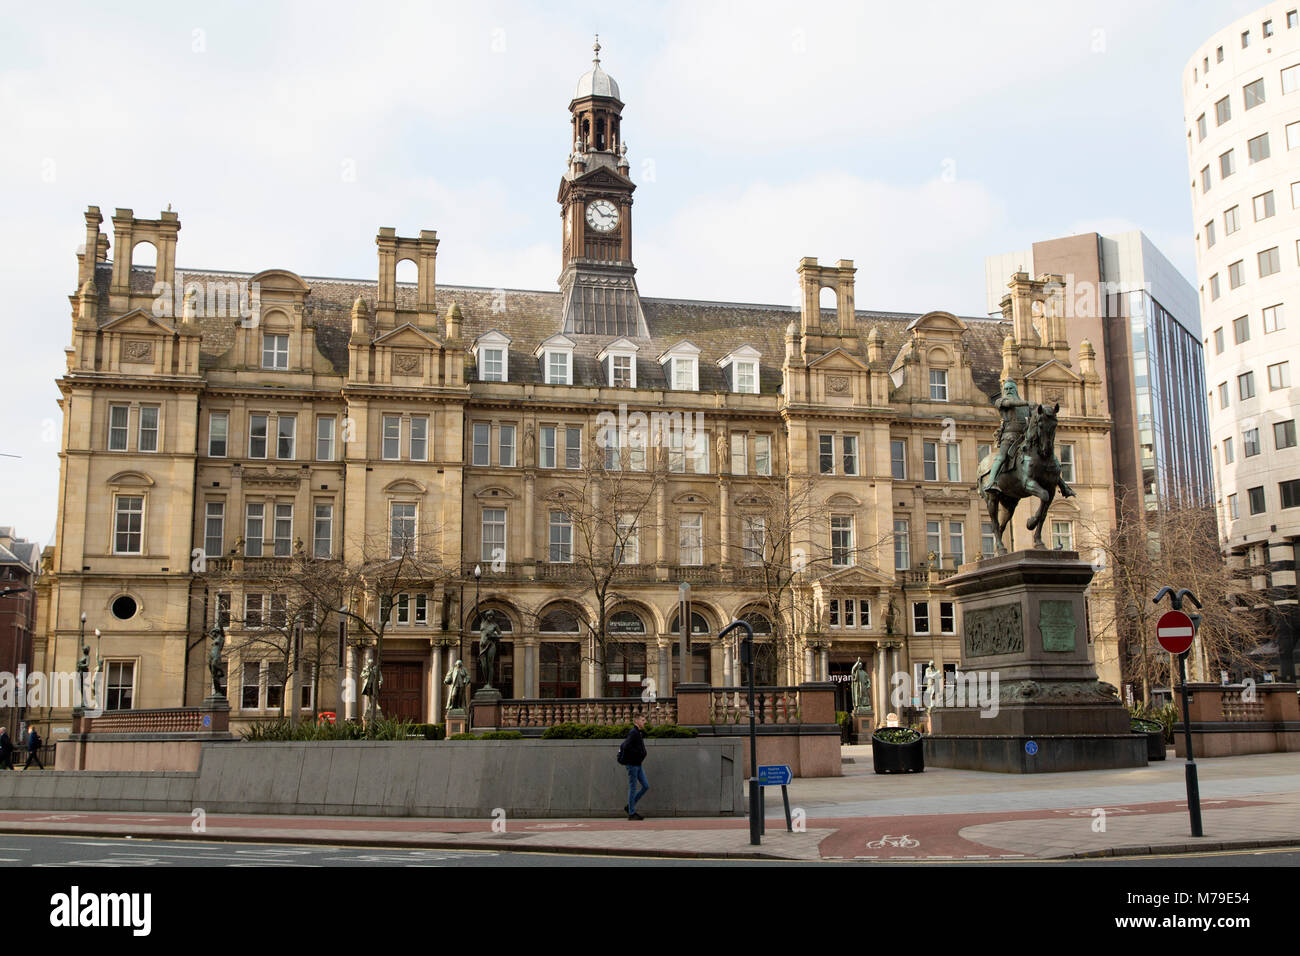 The Old Post Office building on City Square in Leeds, UK. An equine statue of the Black Prince stands on the square. Stock Photo